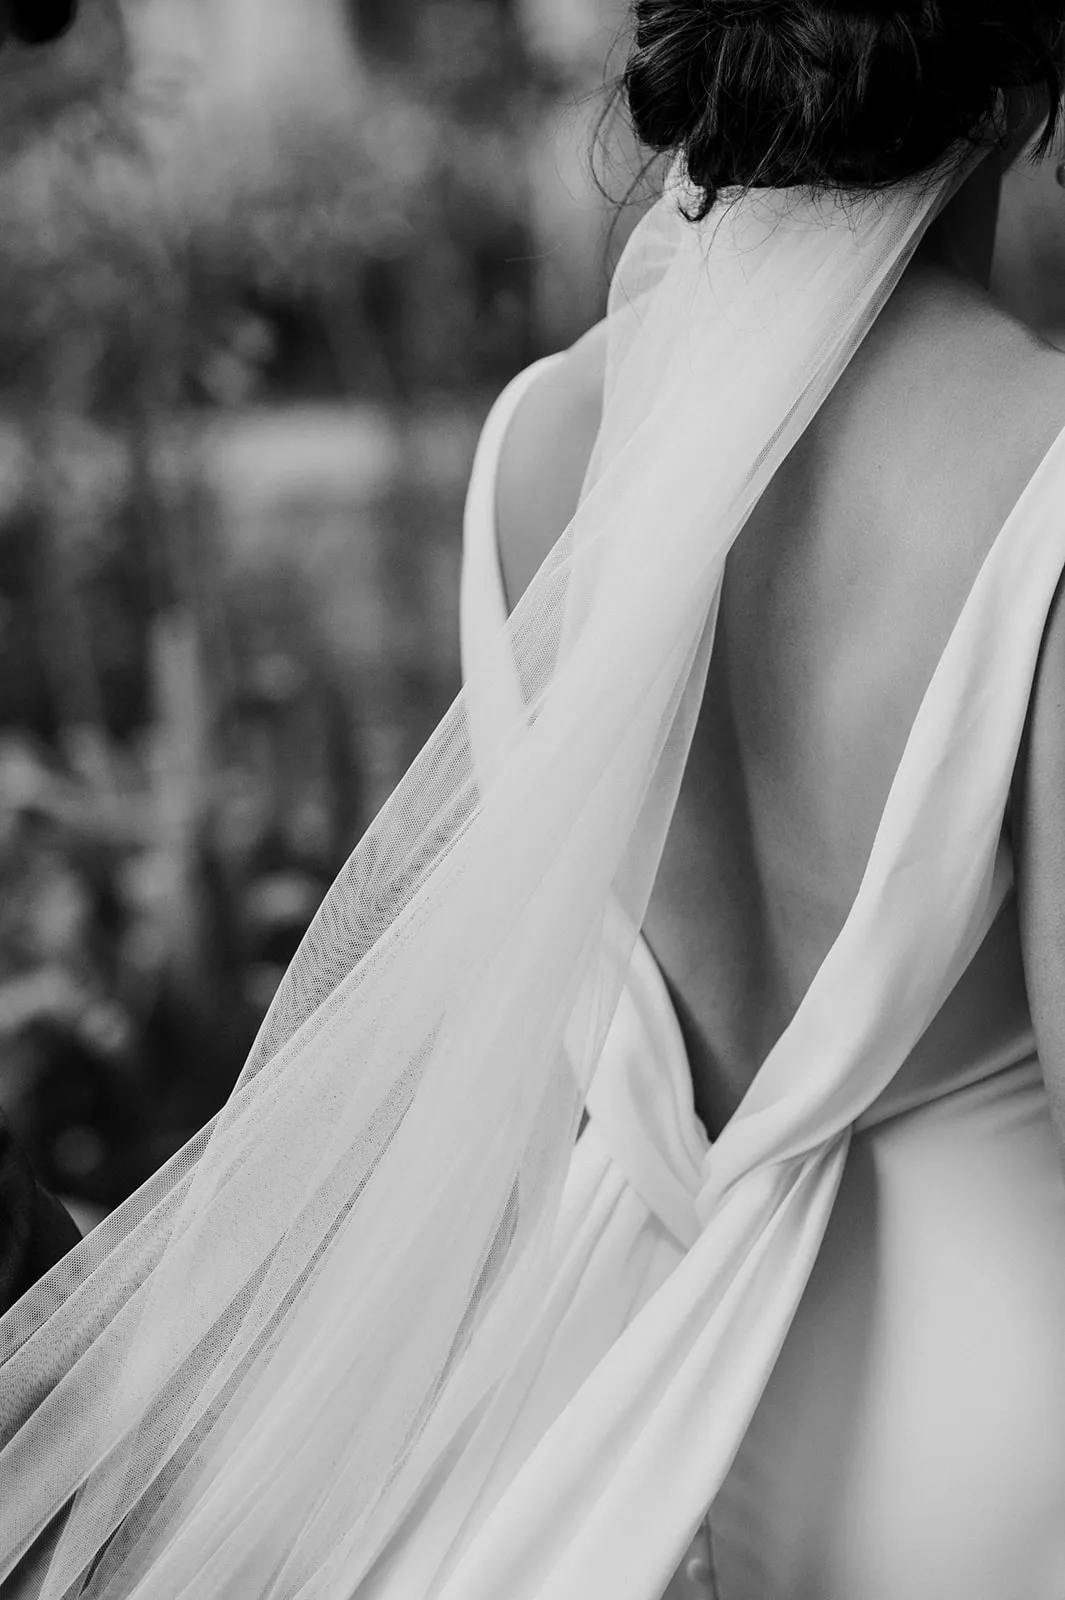 Black and white photo of a bride, seen from the back, wearing a low-back wedding dress with a long, flowing veil draped over her shoulder. The scene is set outdoors with blurred foliage in the background.